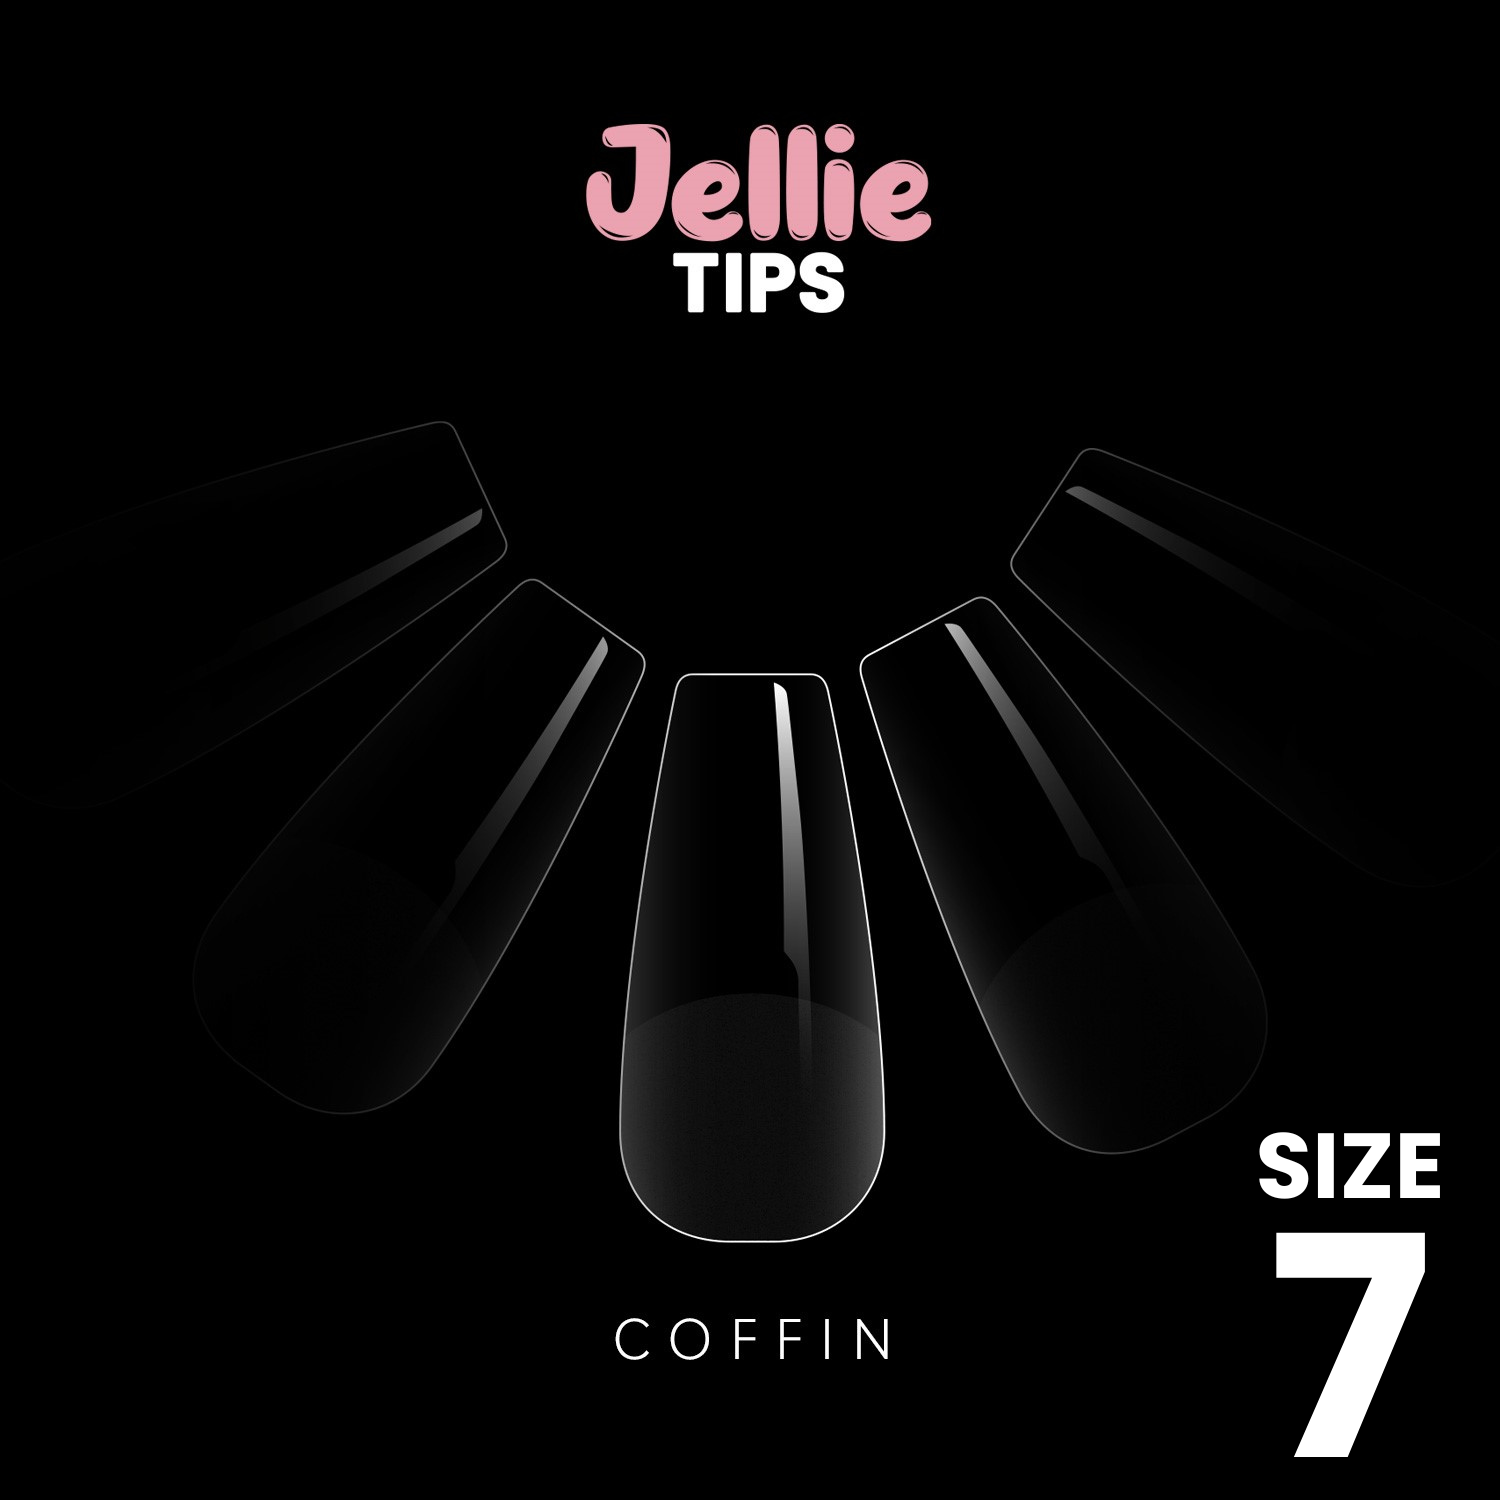 Halo Jellie Nail Tips Coffin, Sizes 7, 50 One Size